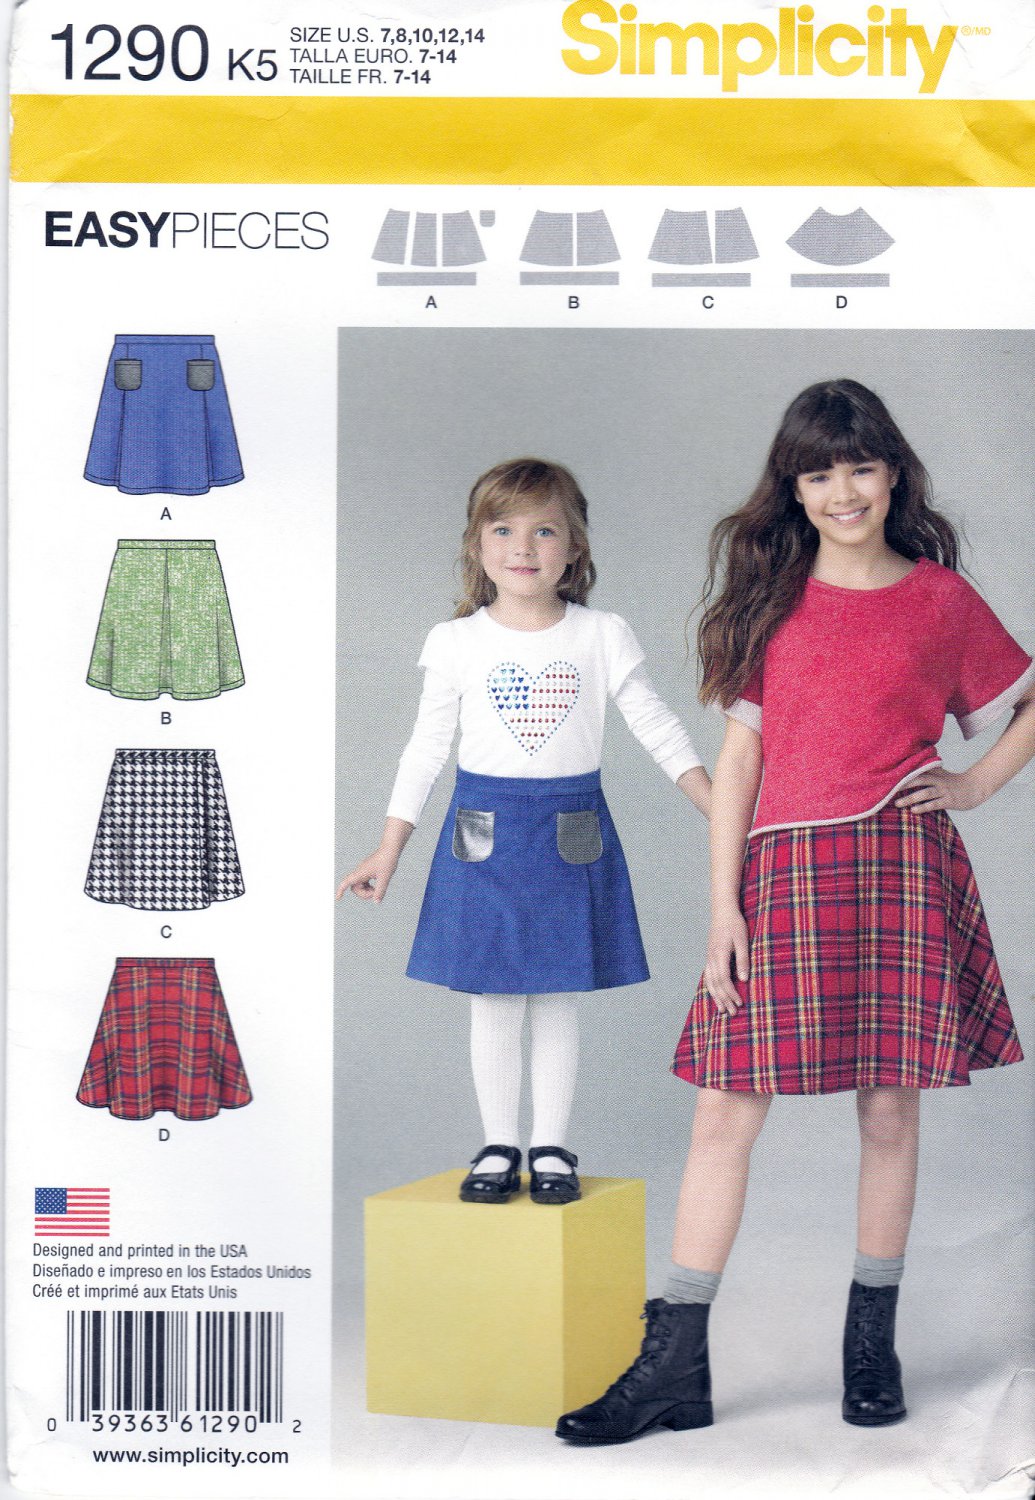 317 Craft Supply Sixties Size 6 Girl Child Vintage Sewing Pattern Set of Shorts Blouse & Skirt Women's Realm- Special pattern